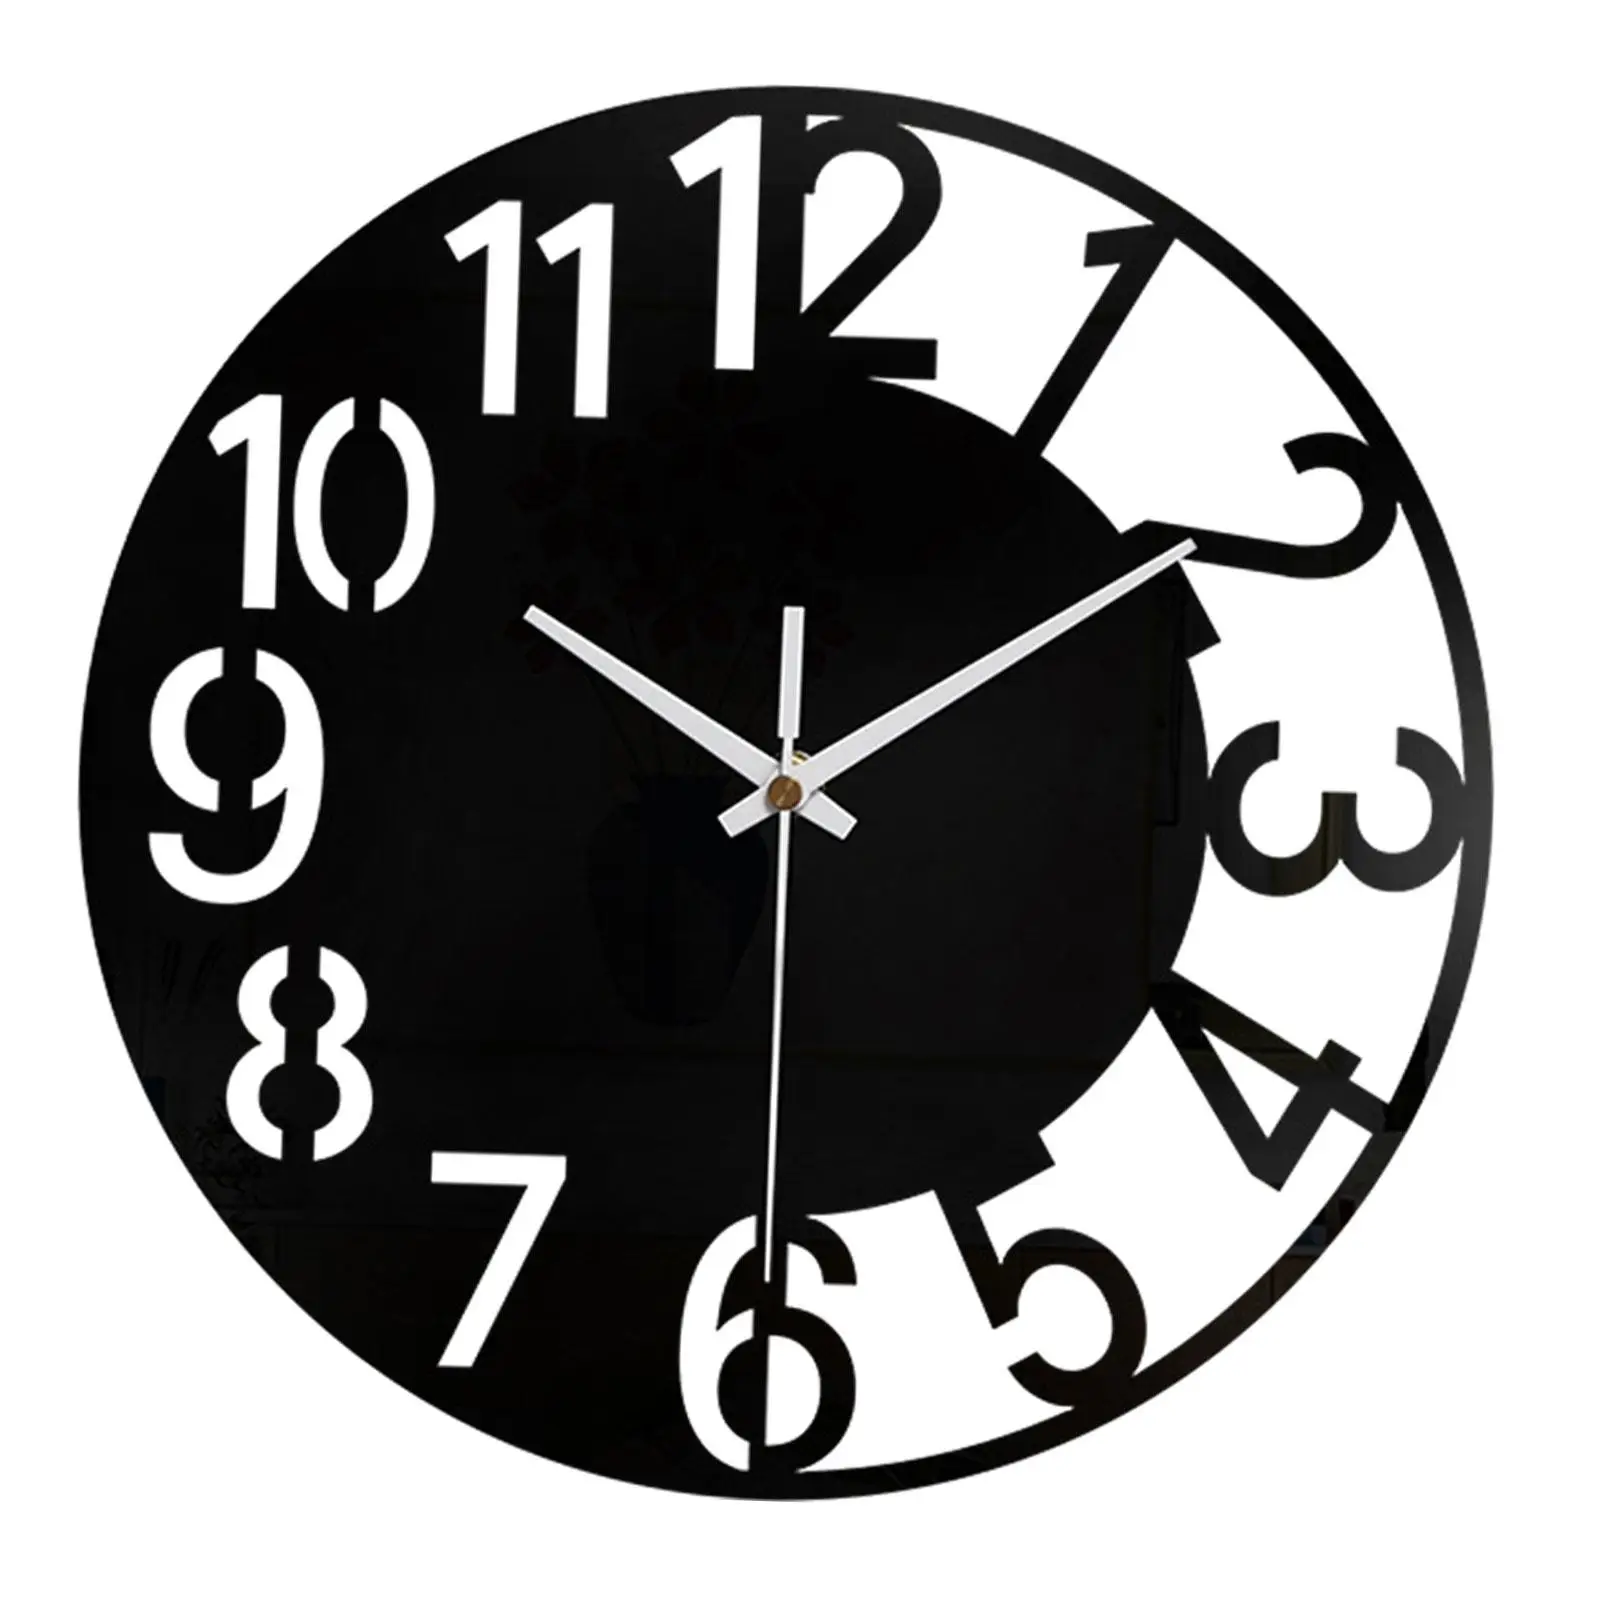 Acrylic Wall Clock Simple Silent Festival Gift Decorative Clock Large Wall Clock for Kitchen Bedroom Living Room Hotel Bathroom